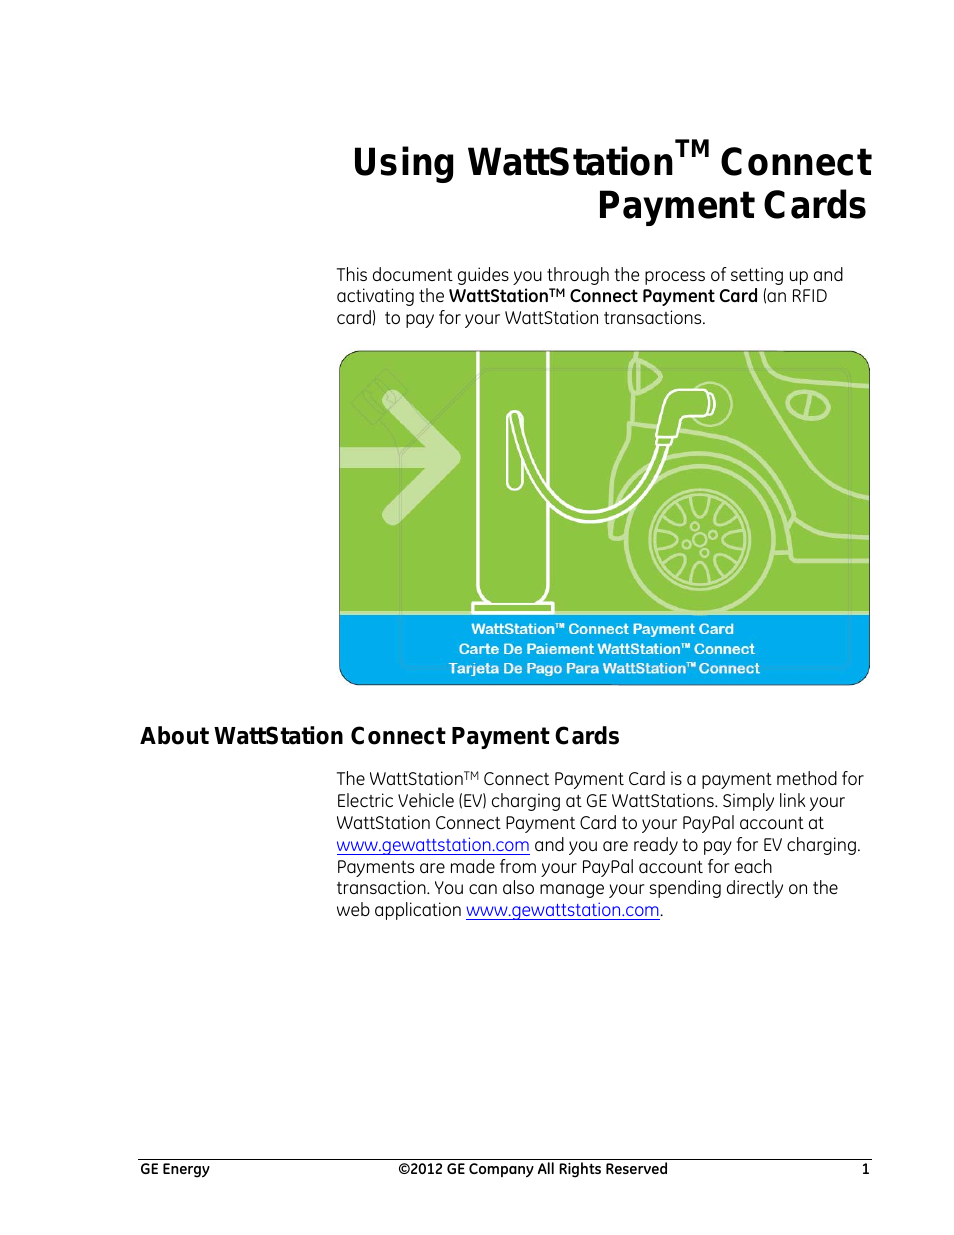 Using WattStation Connect Payment Cards